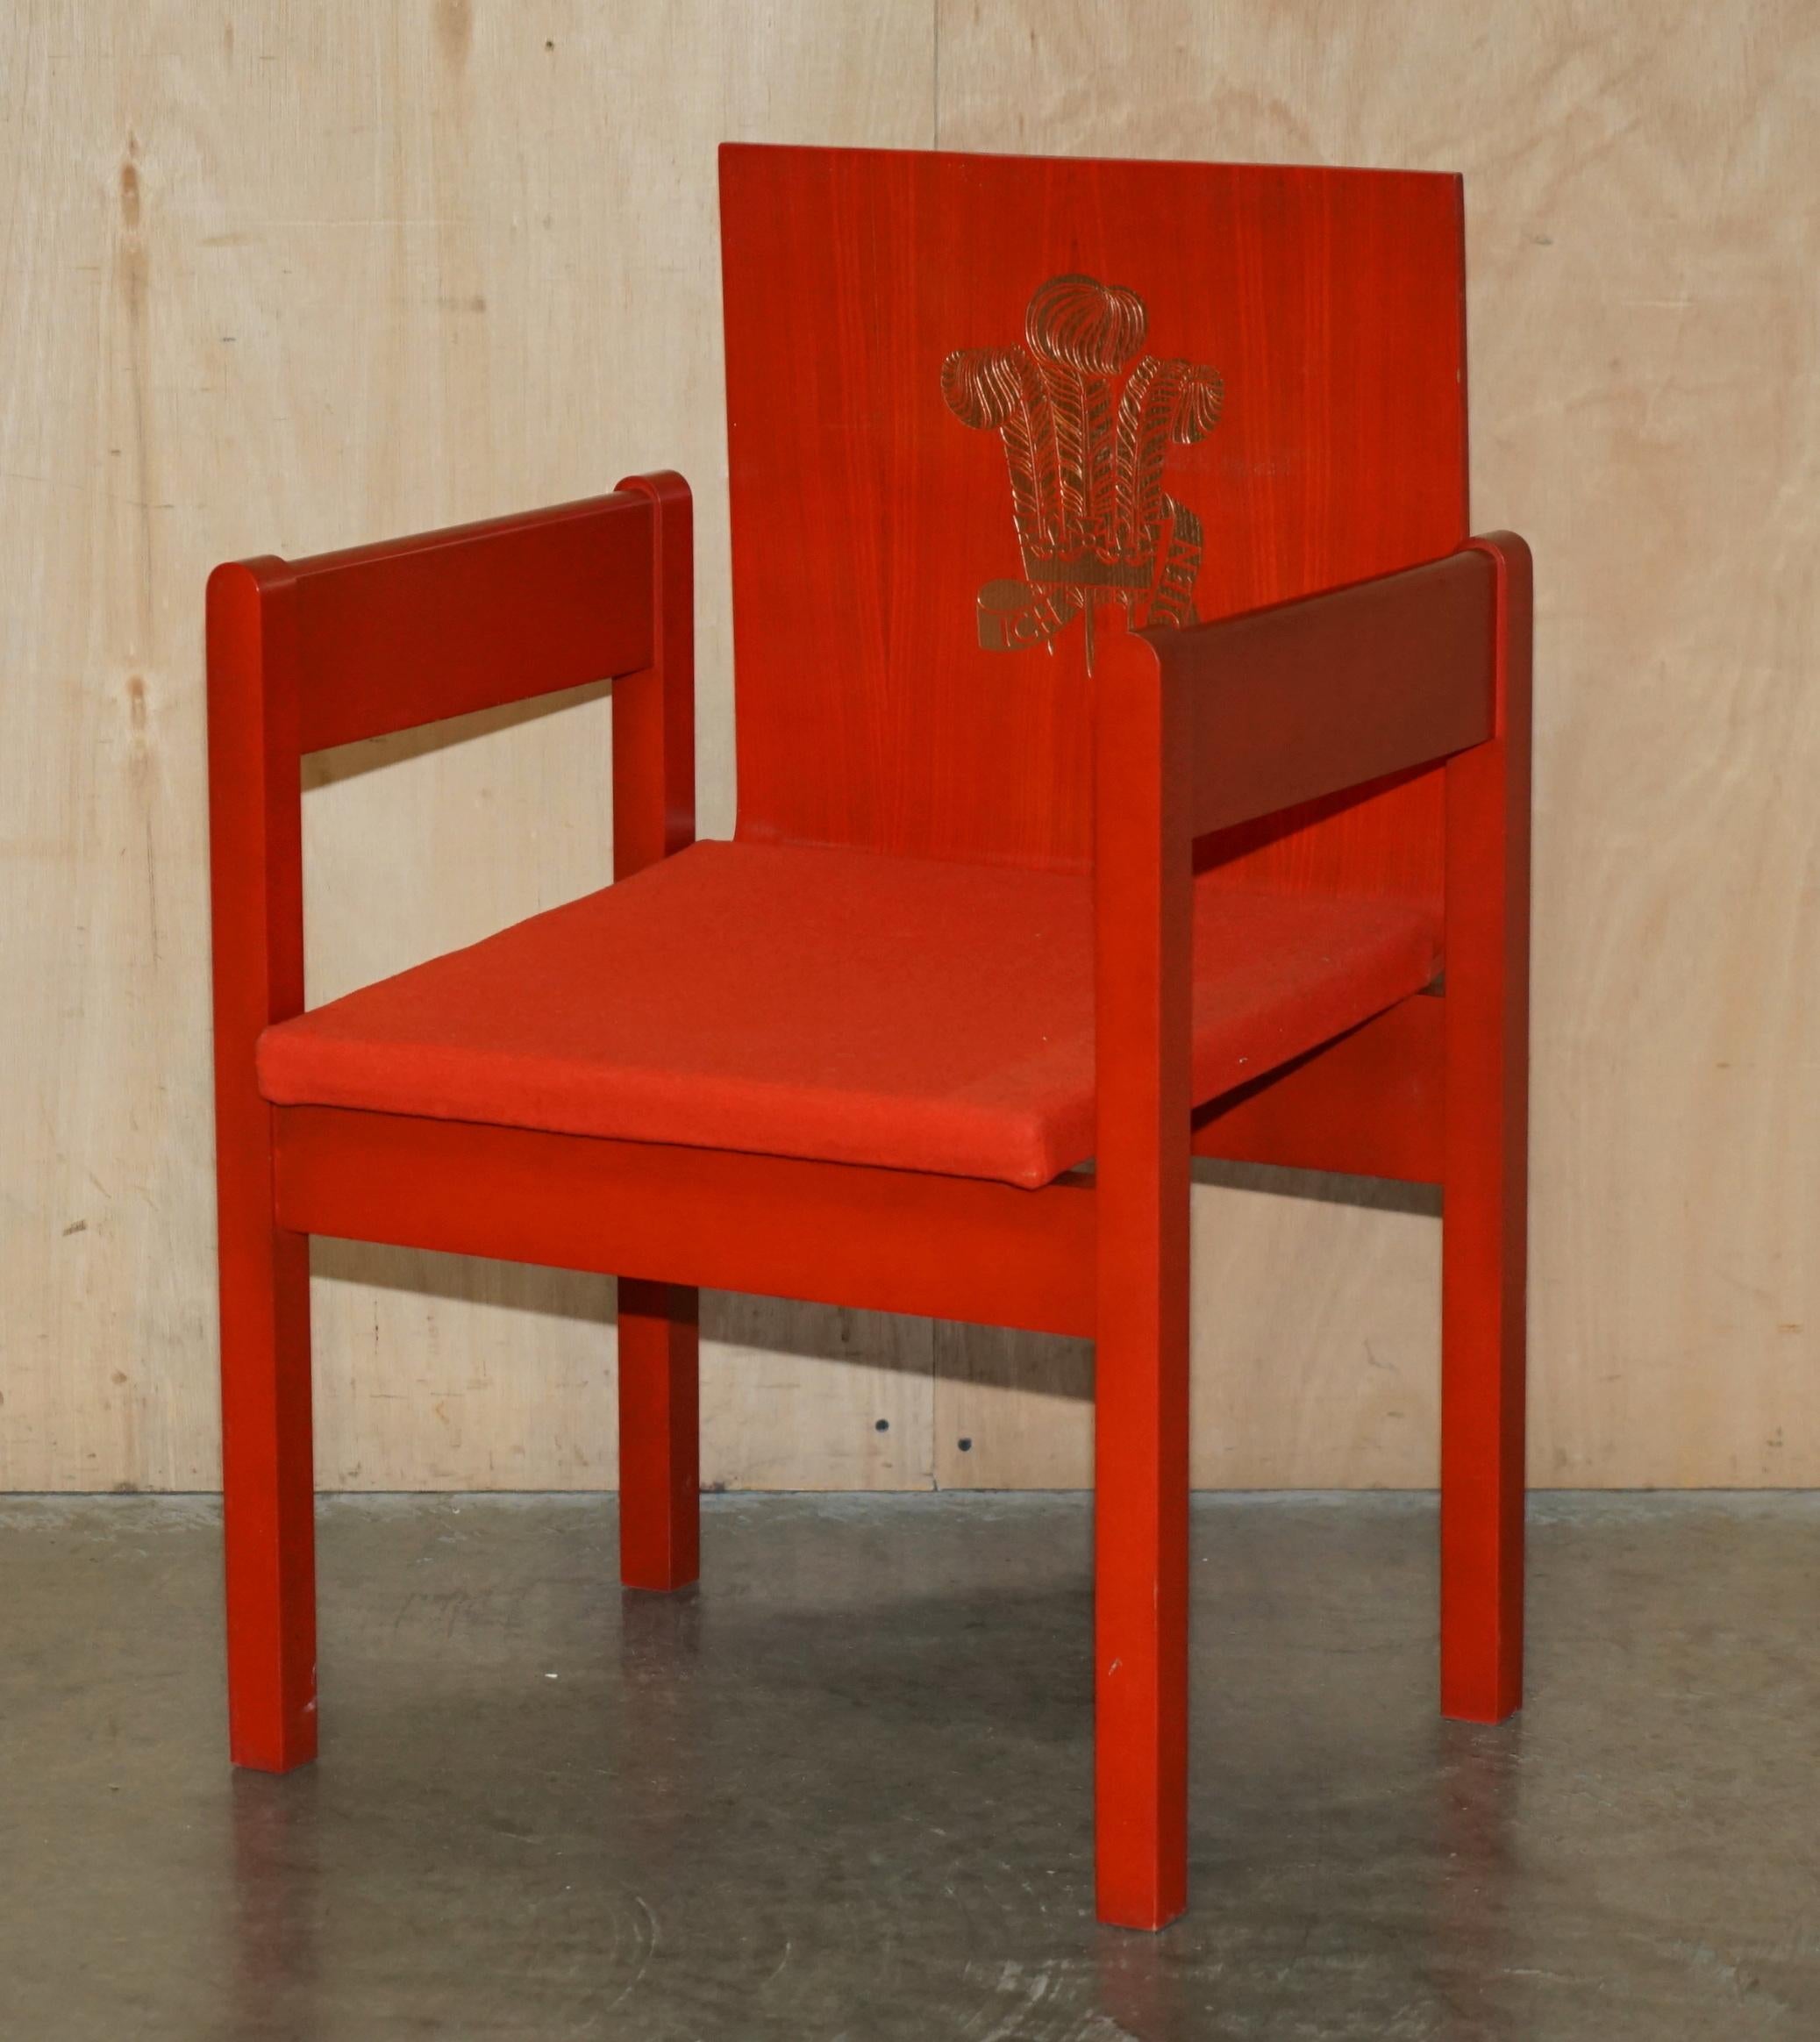 LAST OF ITS KIND BRAND NEW IN THE BOX 1969 PRINCE CHARLES INVESTITURE ARMCHAiR For Sale 7